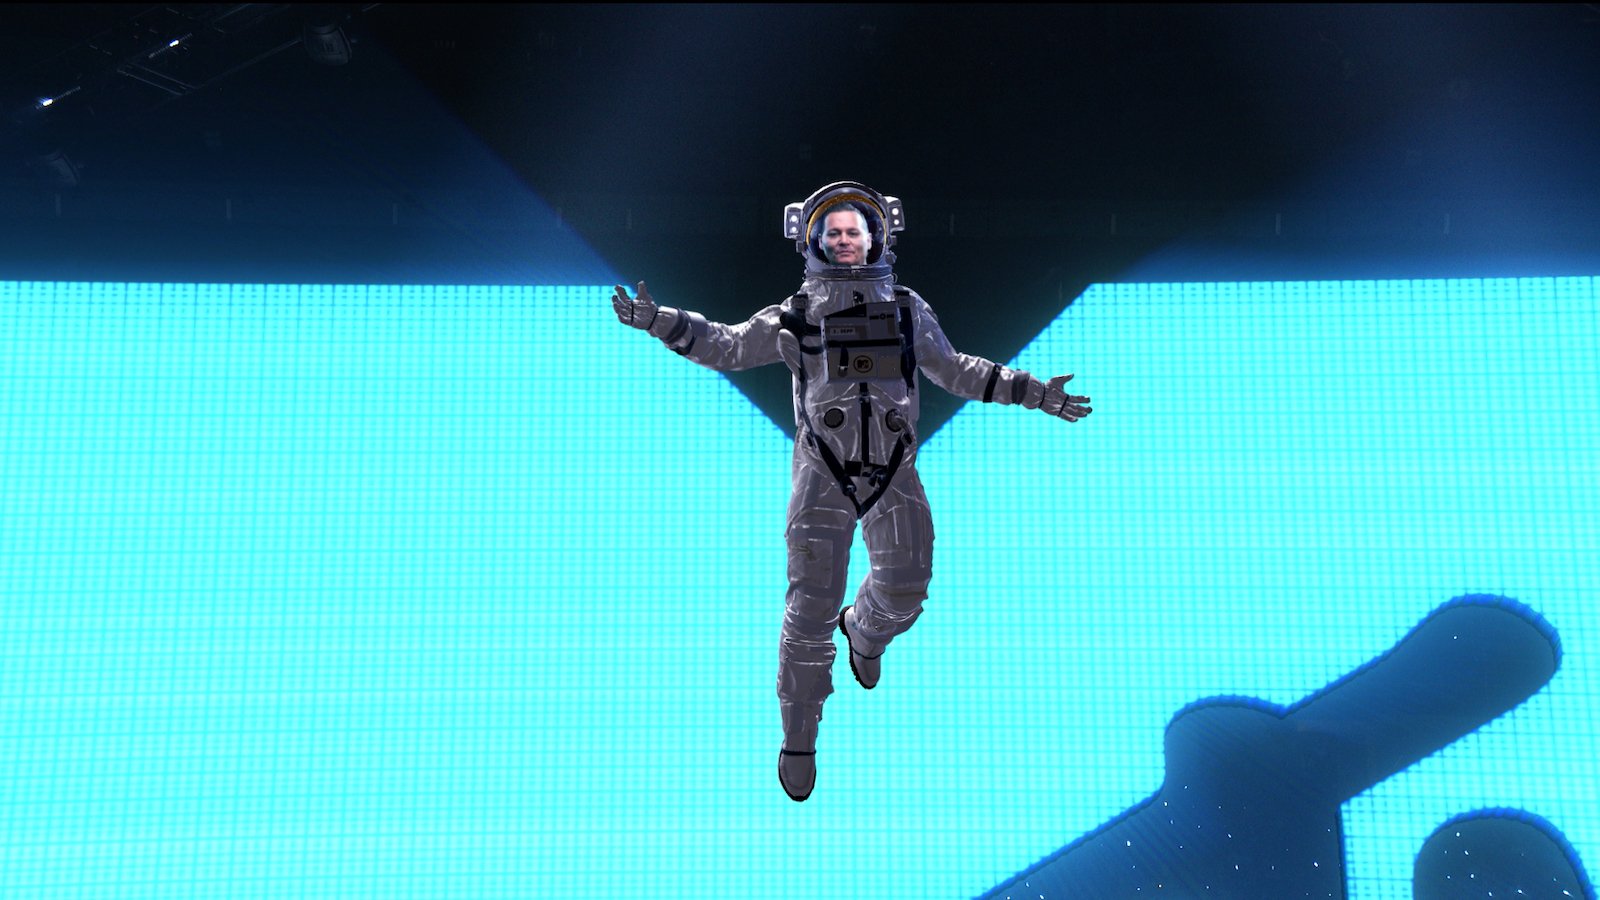 Johnny Depp is suspended above the audience wearing a spacesuit at the 2022 MTV VMAs. 